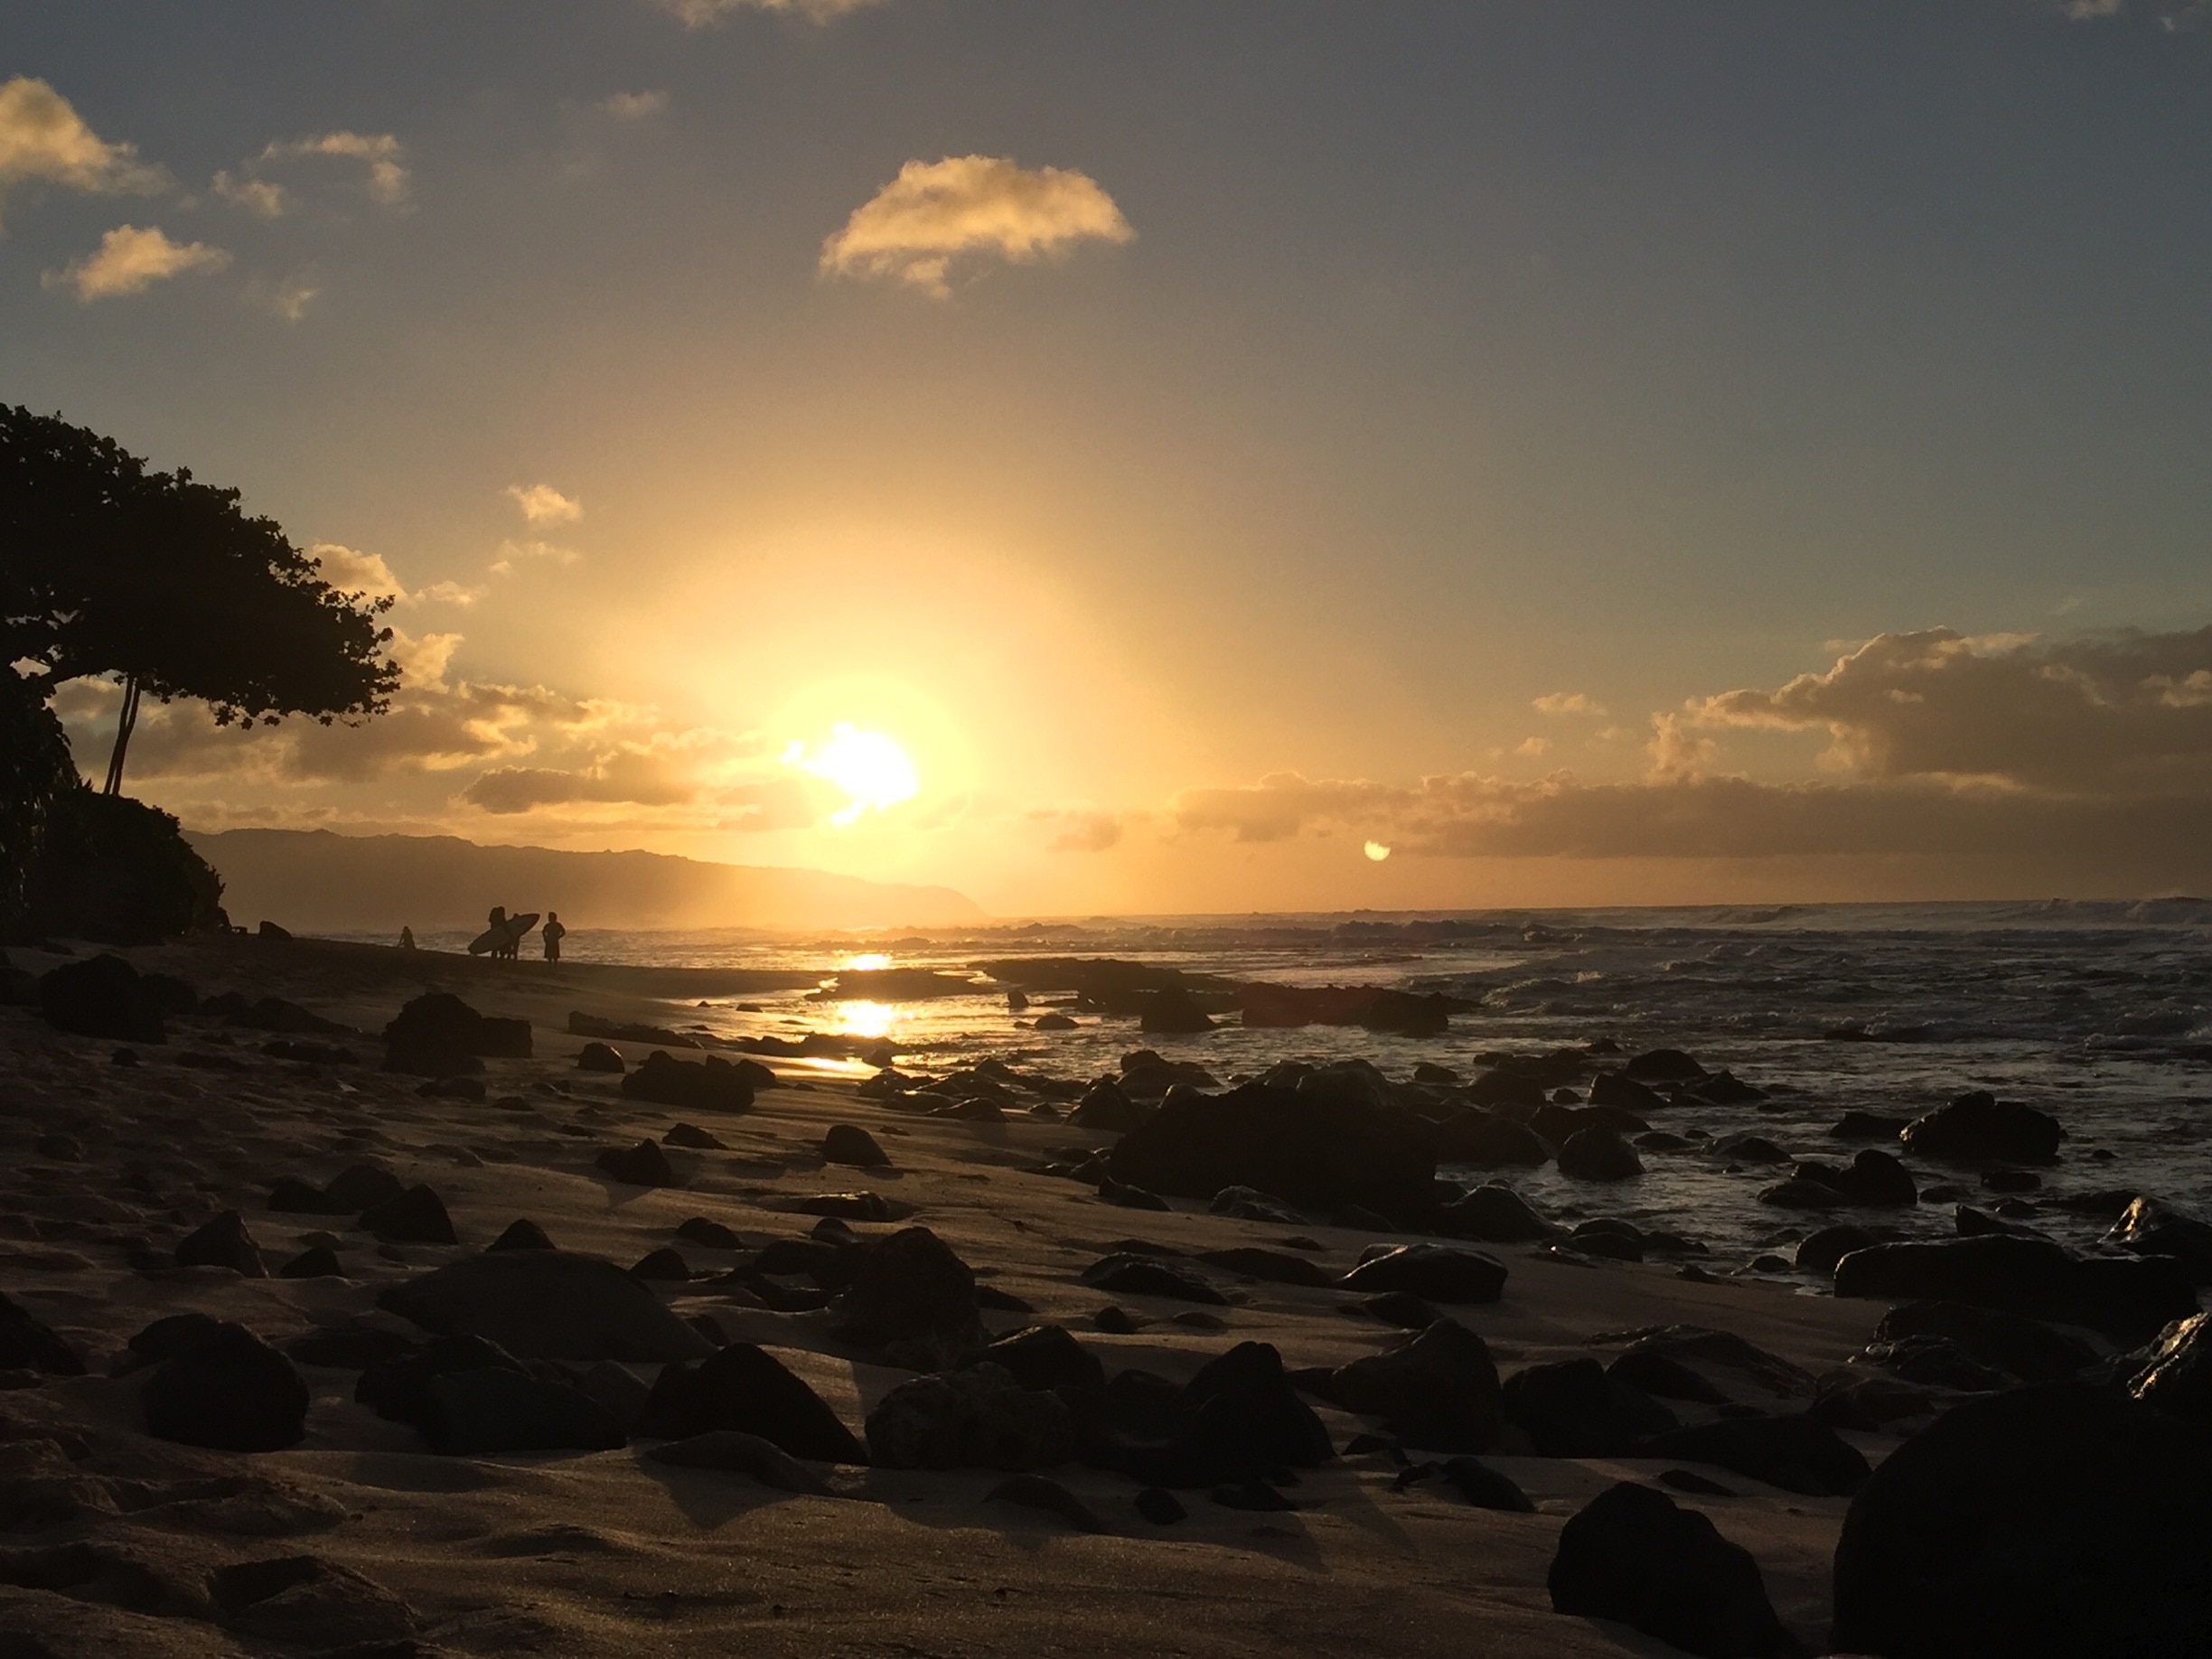 Another surfer's sunset on North Shore where everything moves more slowly. #lifeatexpedia #beachbound